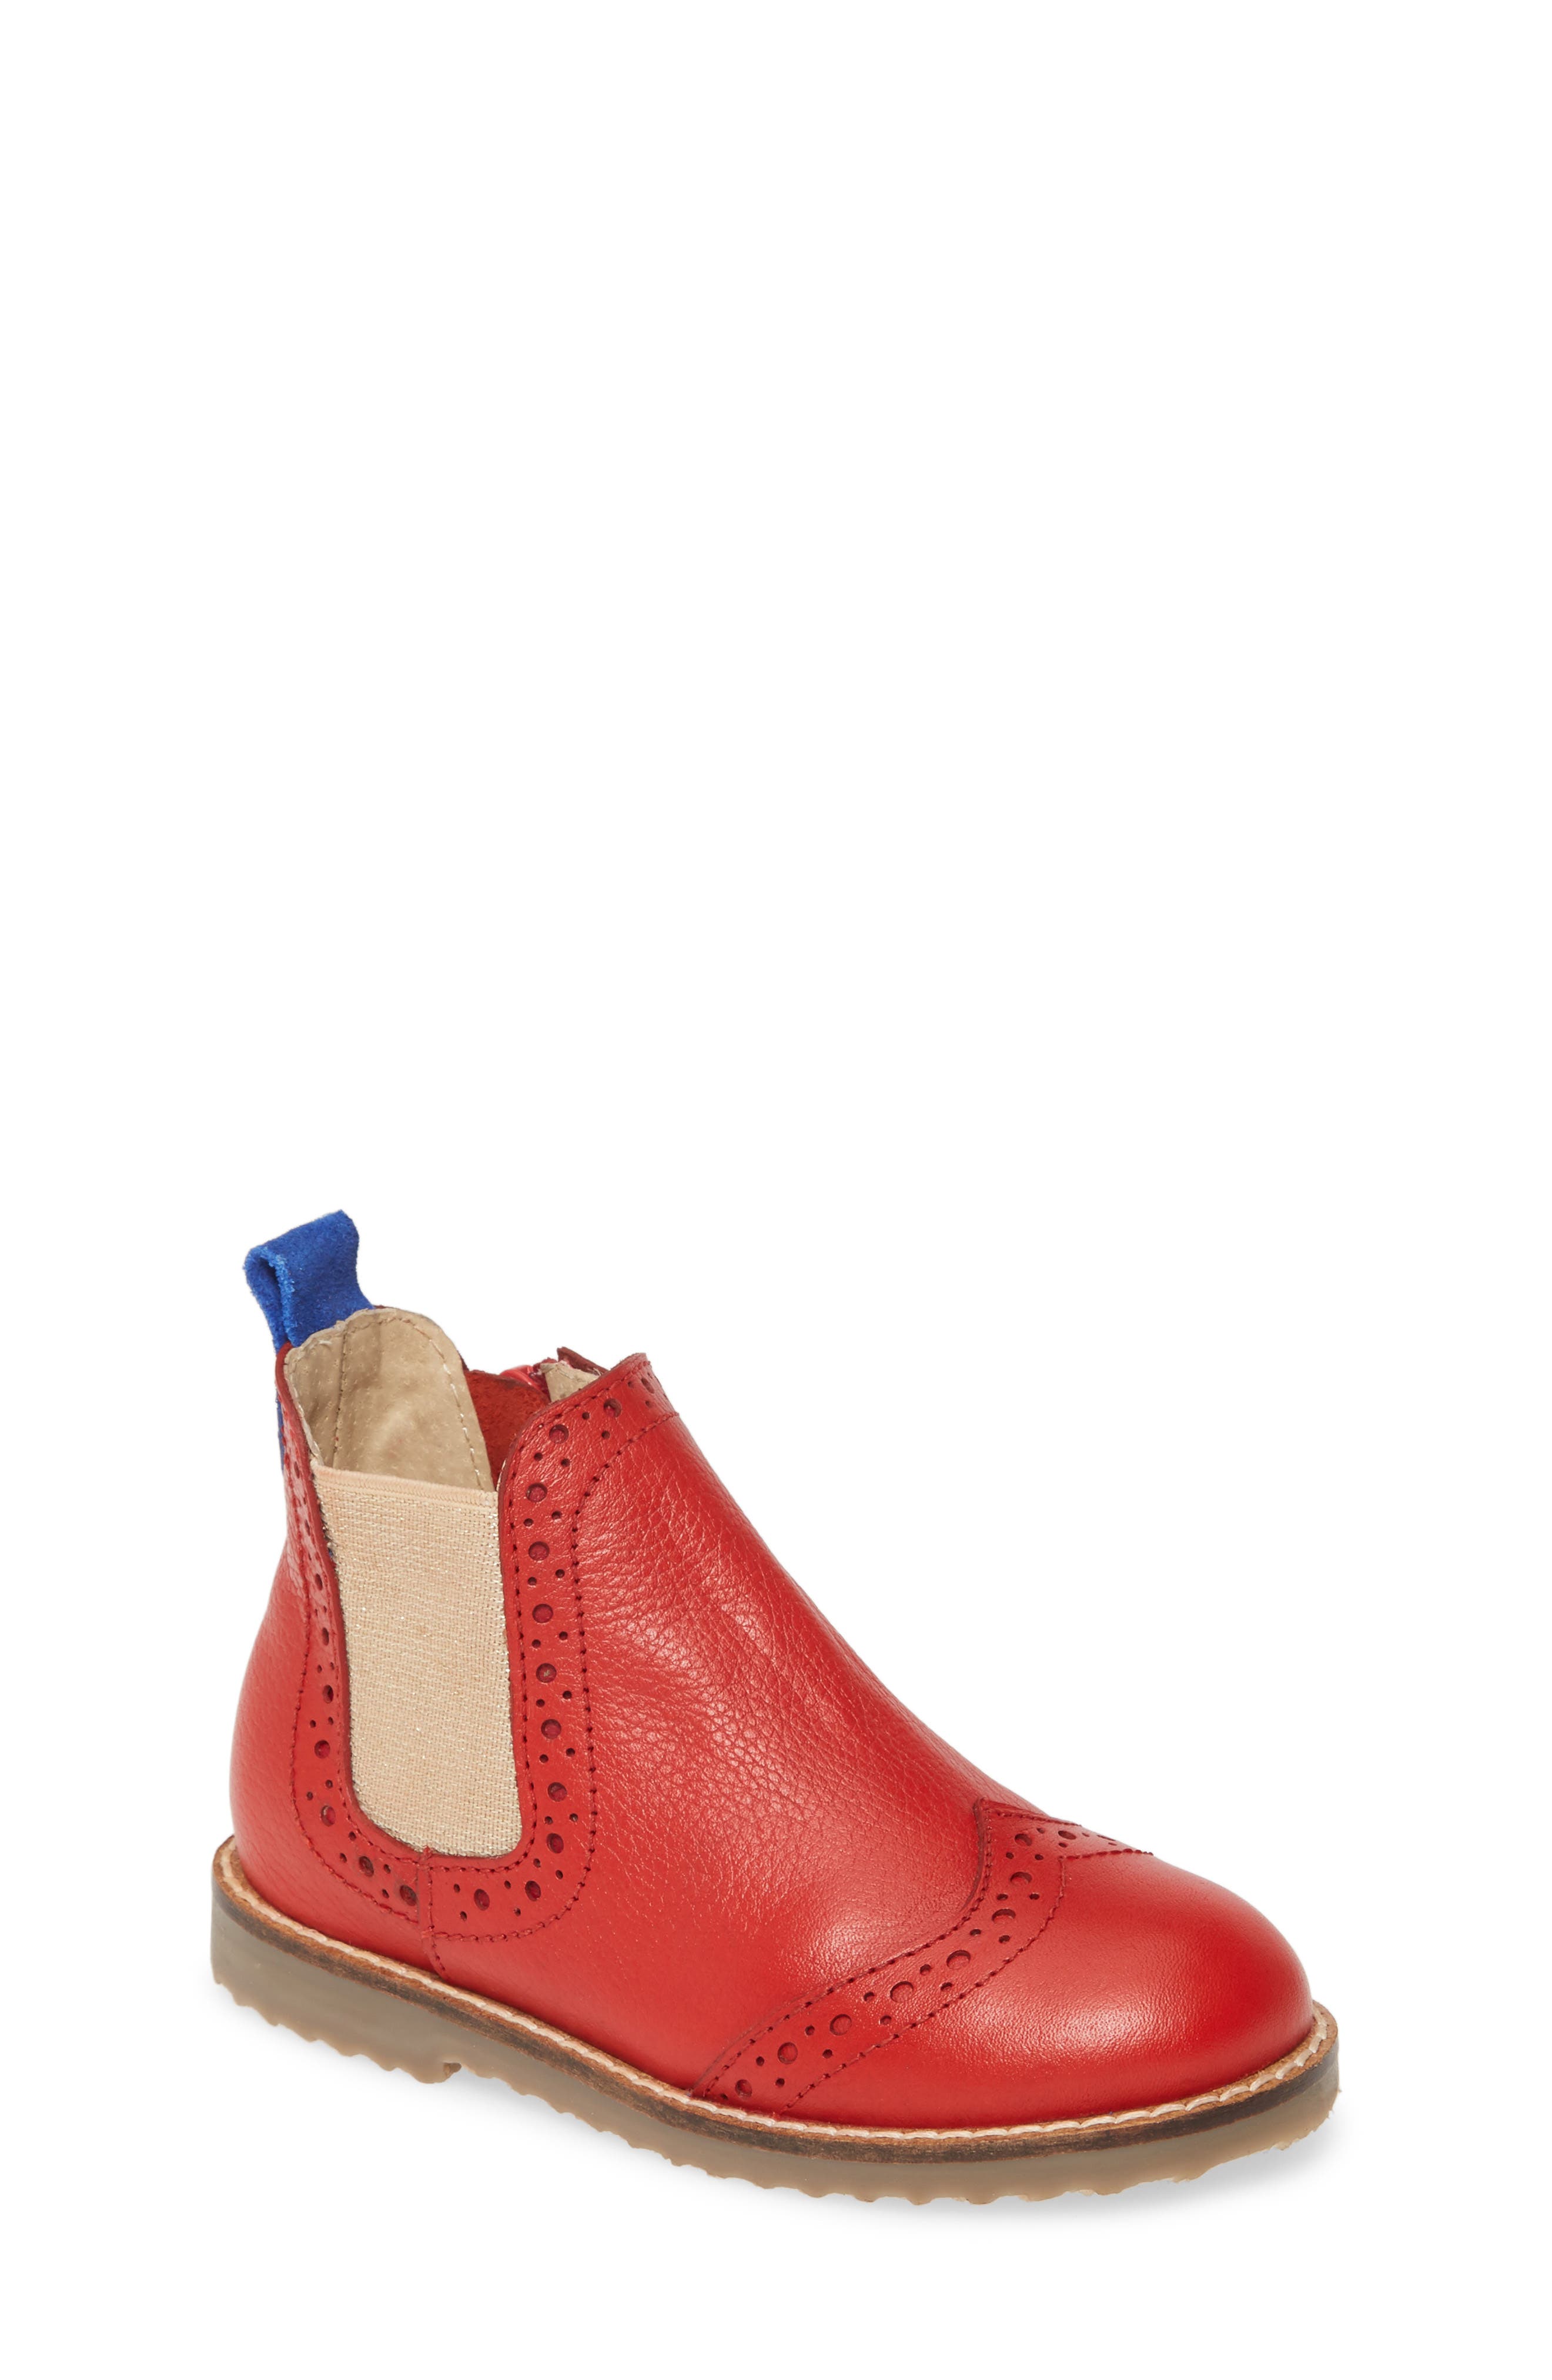 boden red boots